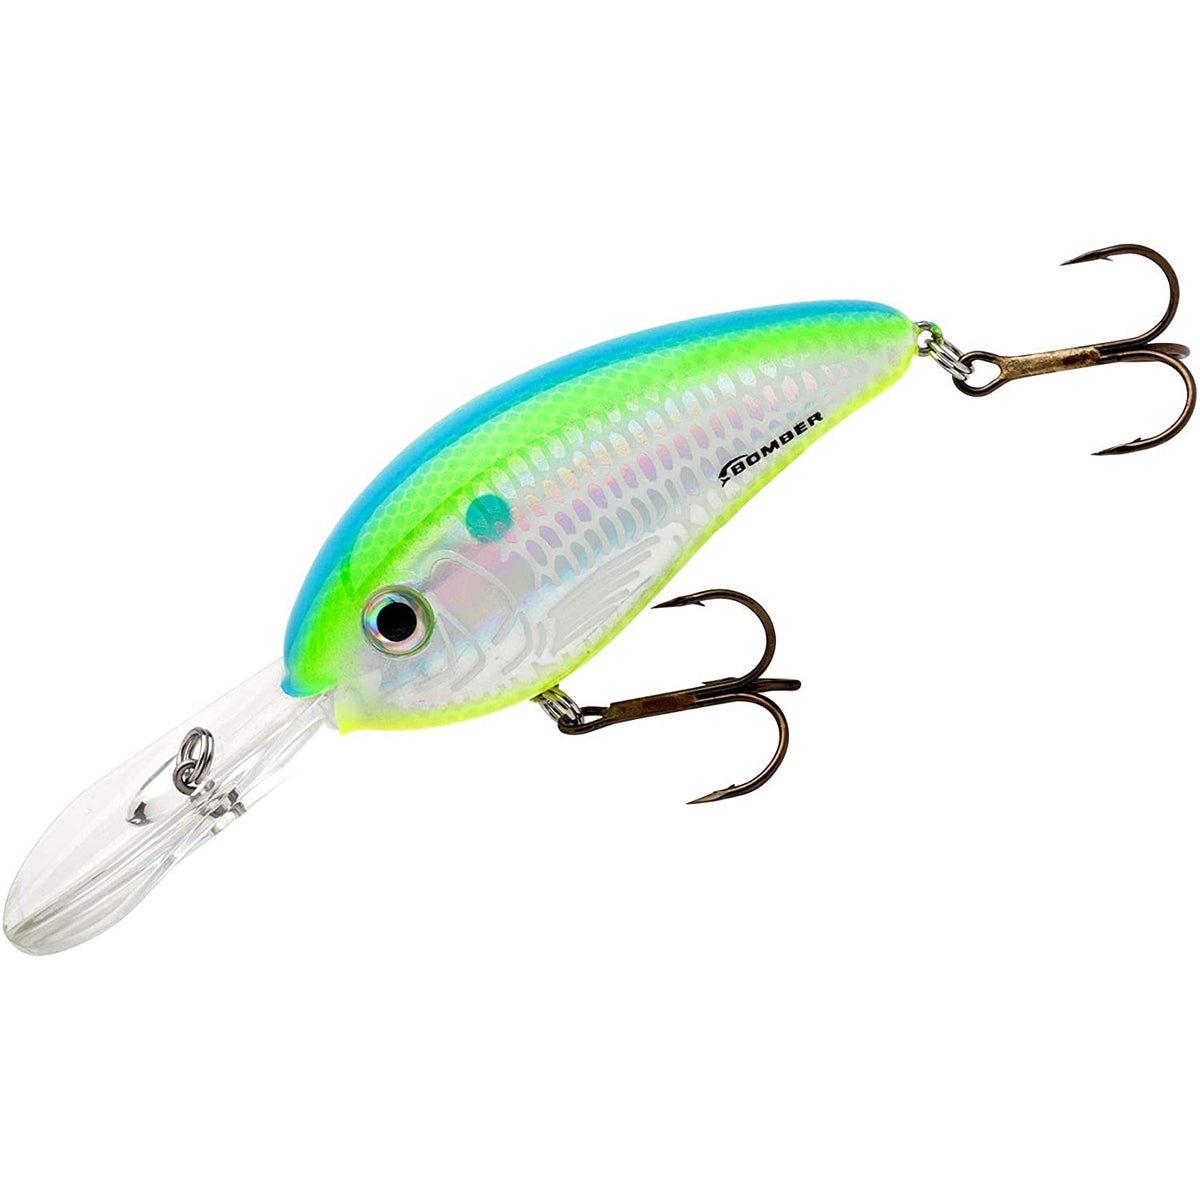 Bomber Fat Free Shad Fingerling 3/8 oz Fishing Lure - Dance's Citrus Shad Bomber Lures